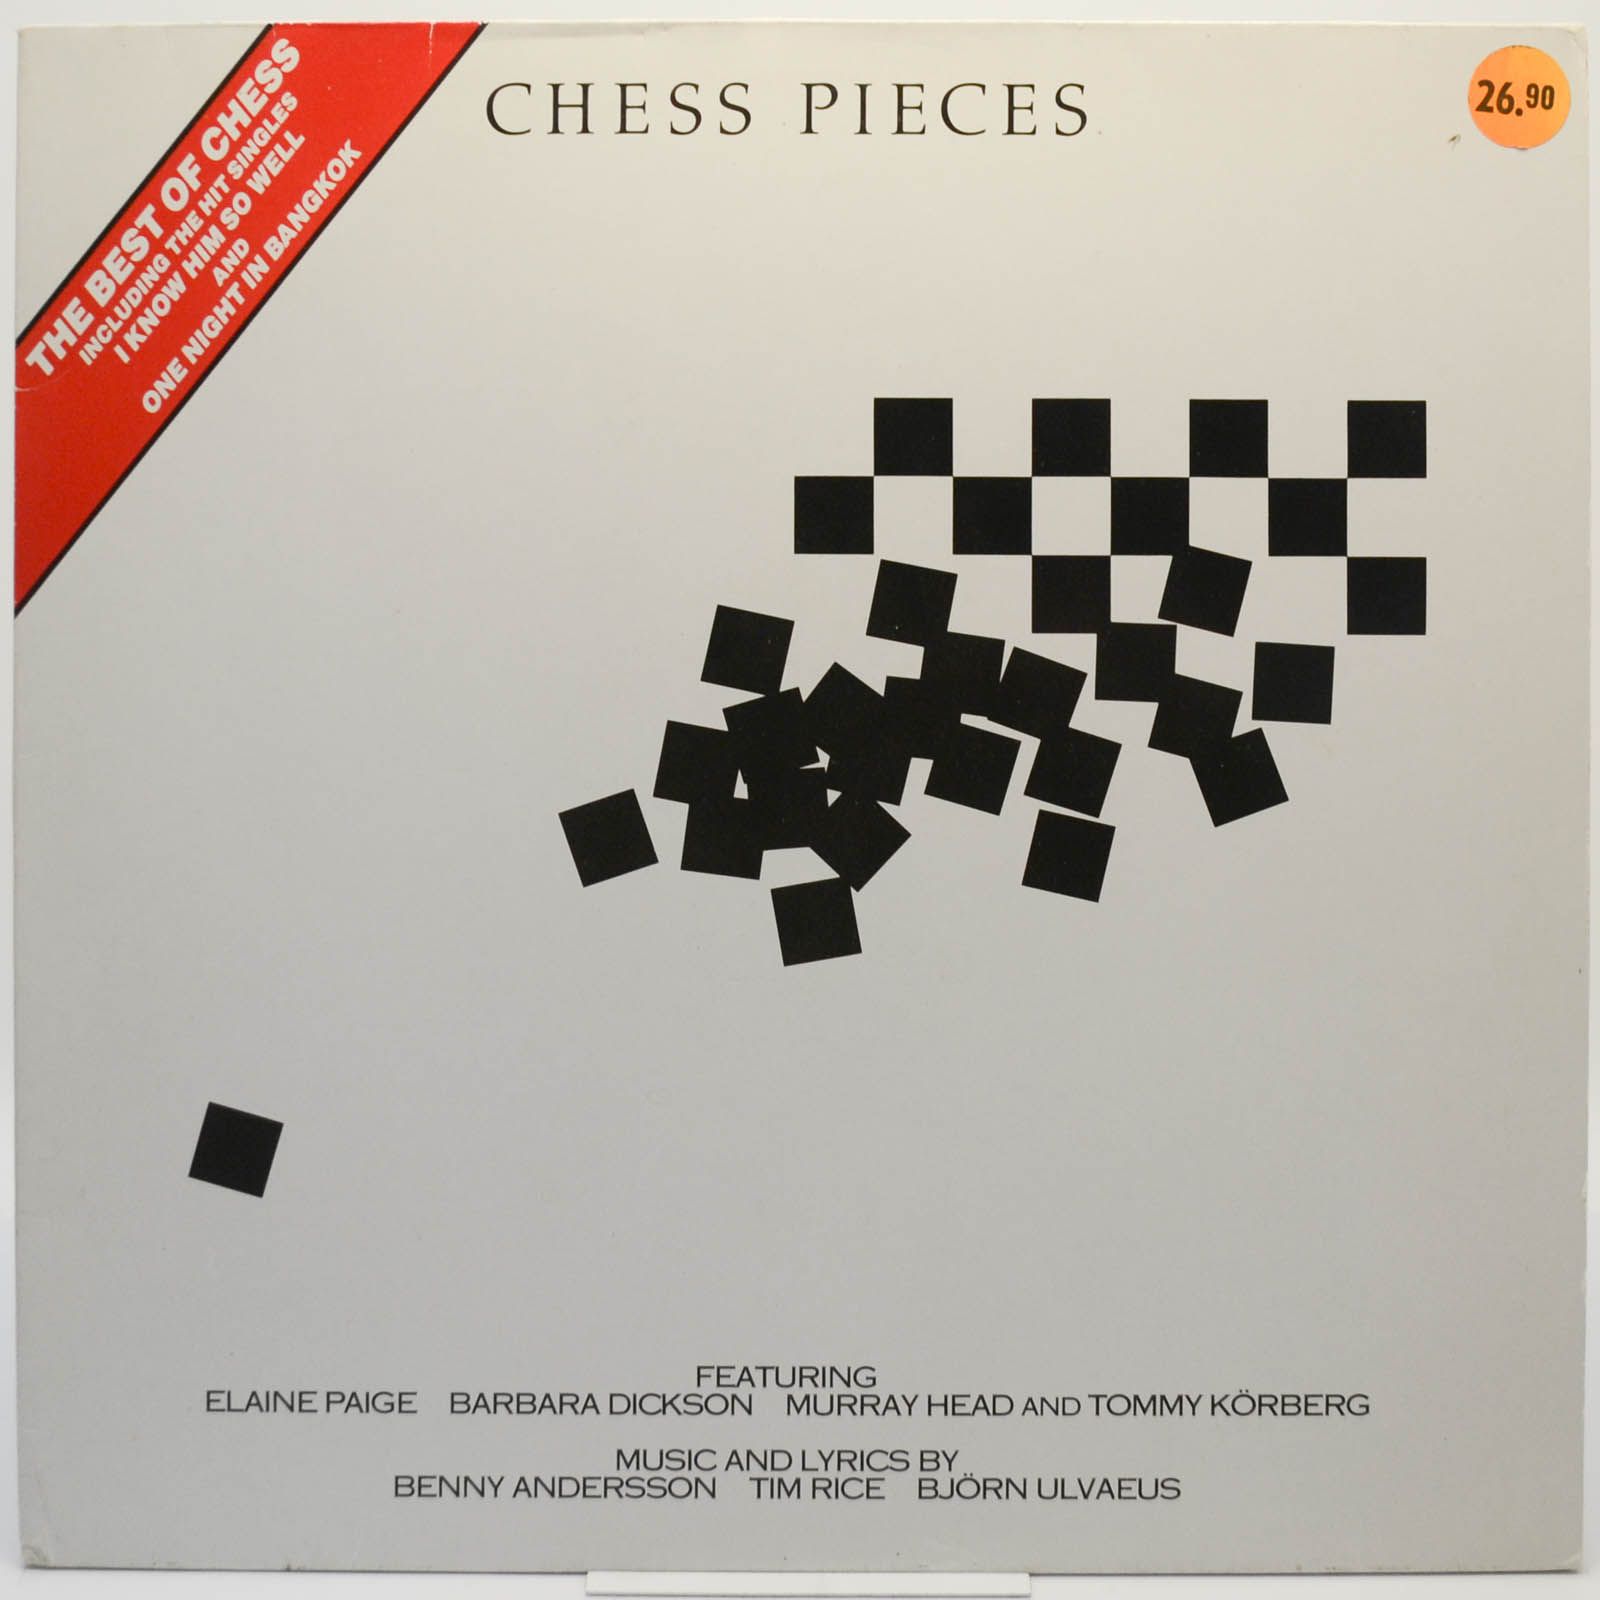 Benny Andersson, Tim Rice, Björn Ulvaeus — Chess Pieces, 1986